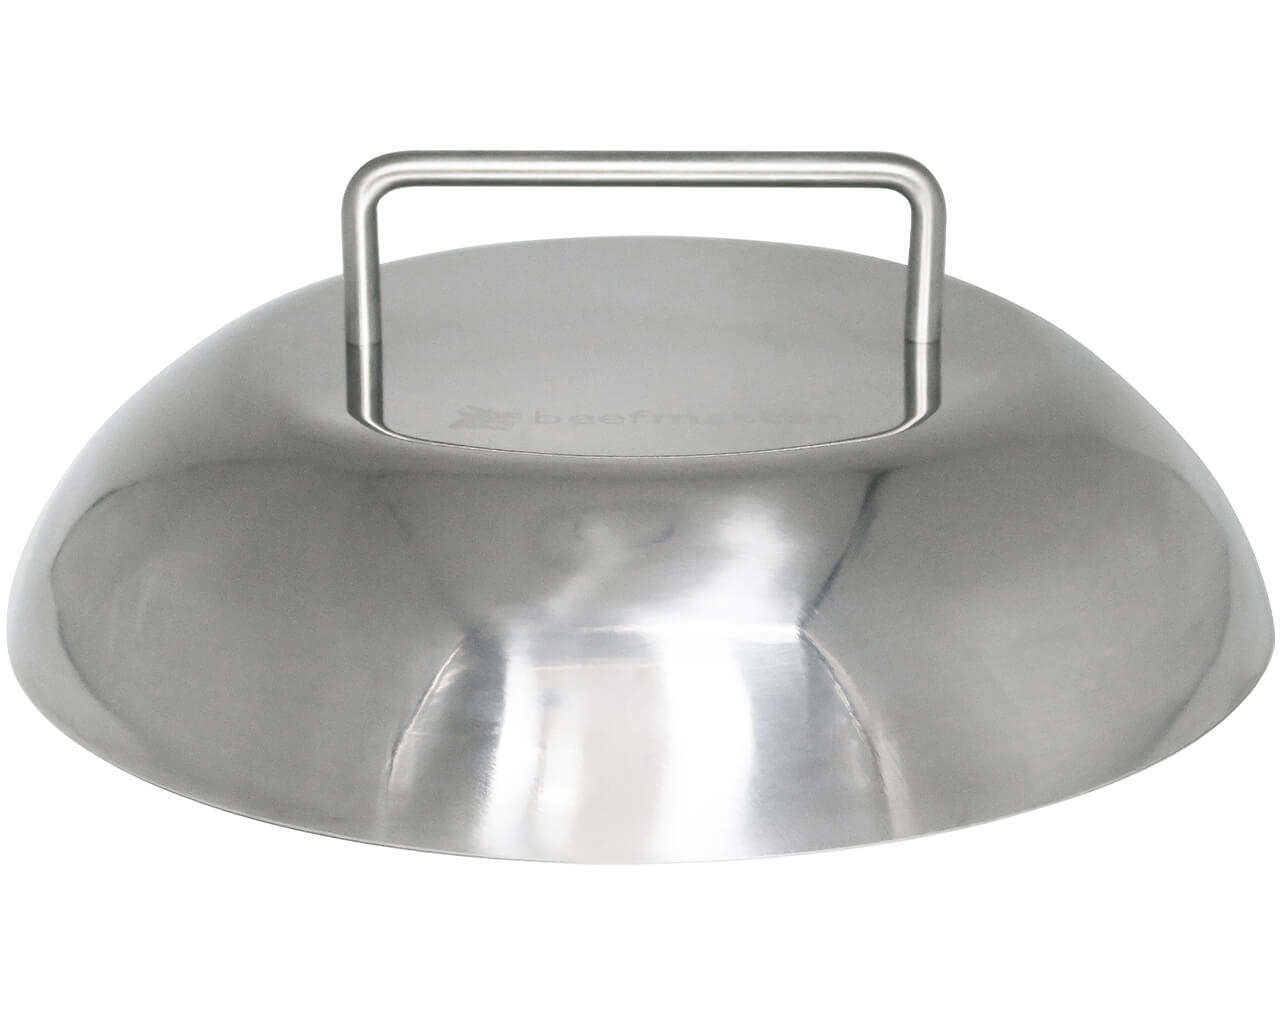 Beefmaster Round Grill Dome - 28cm, , hi-res image number null